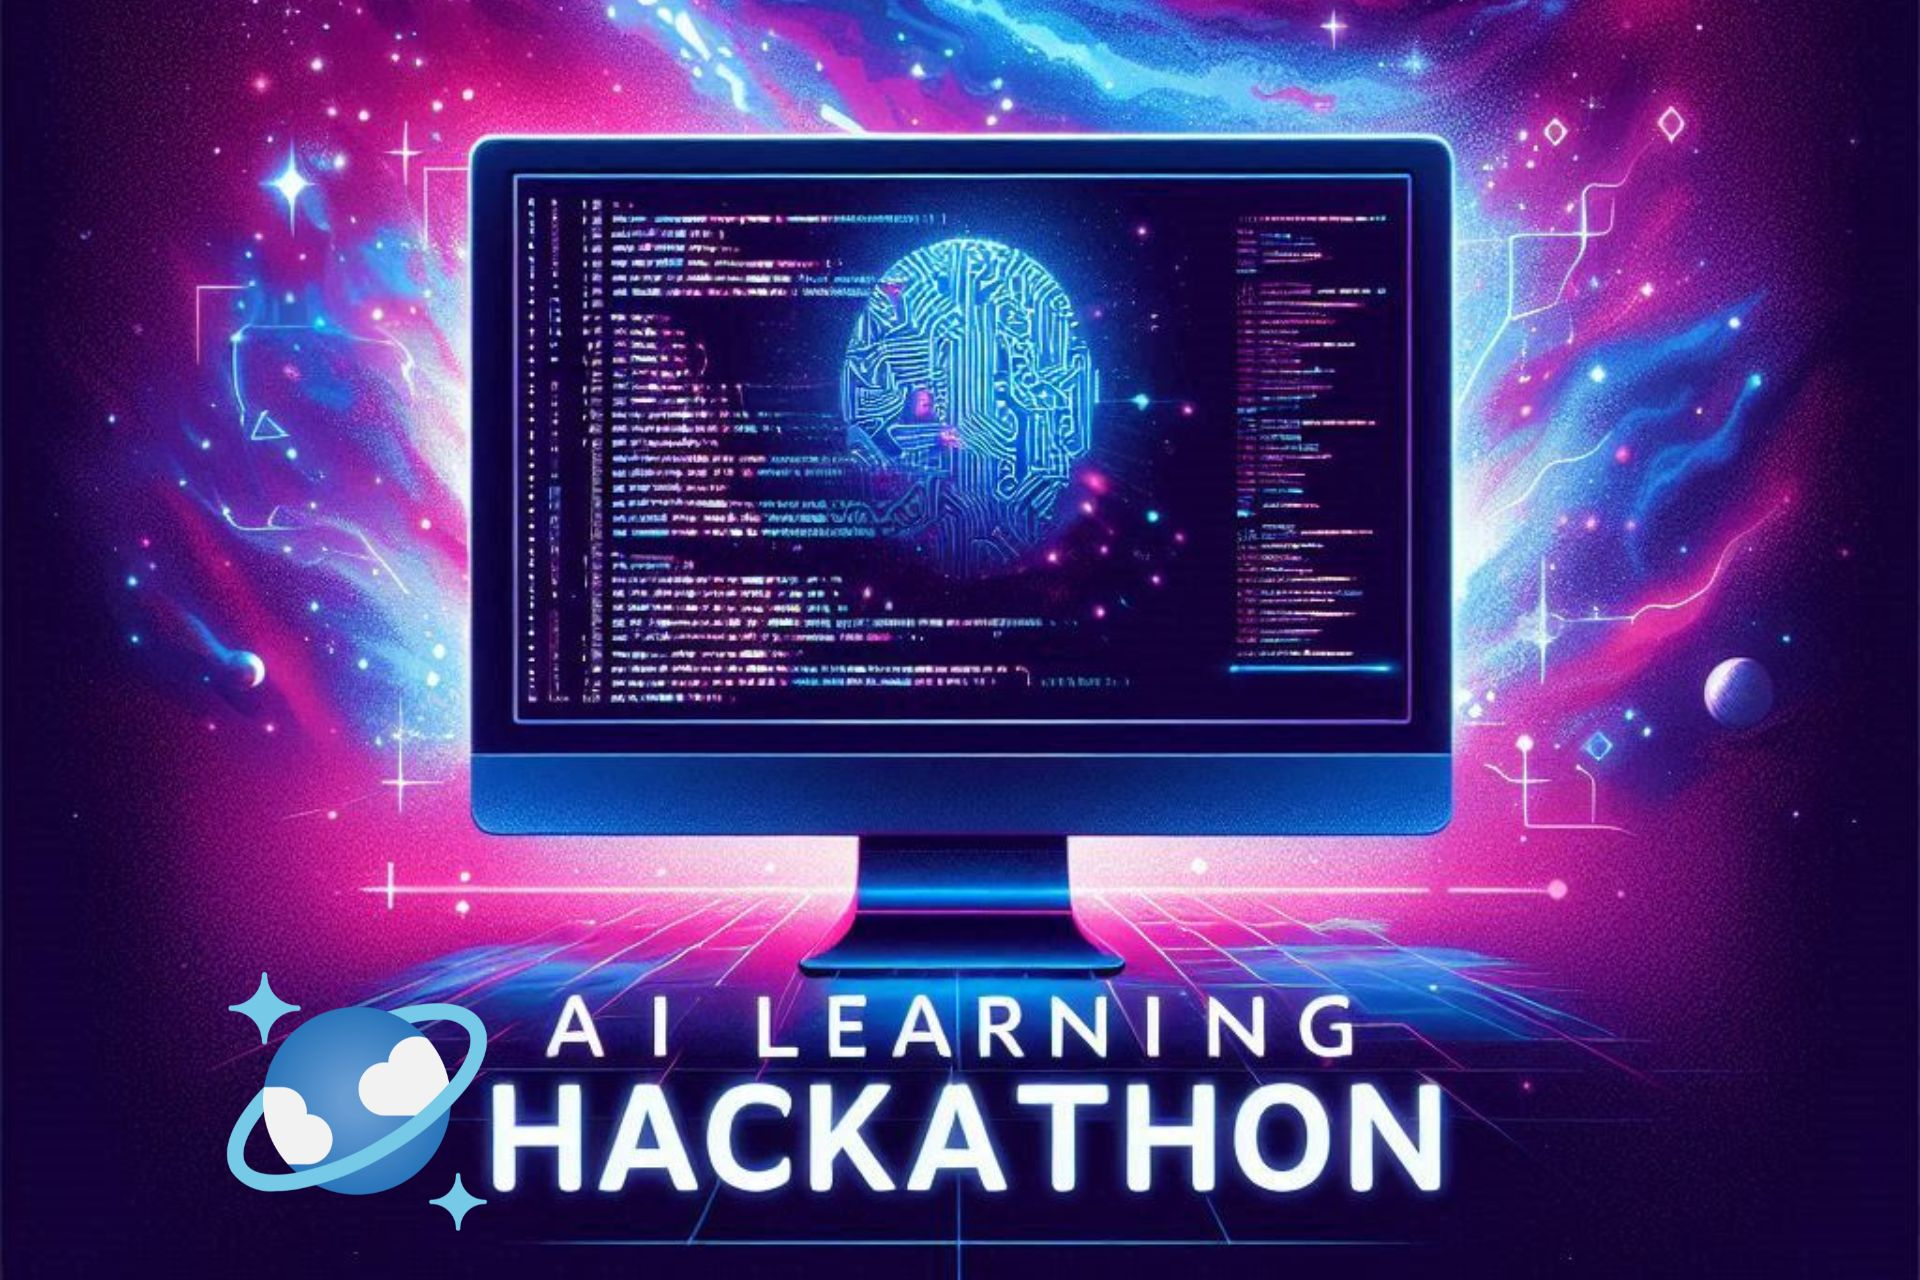 The logo of Azure Cosmos DB featured in an AI Learning Hackathon poster